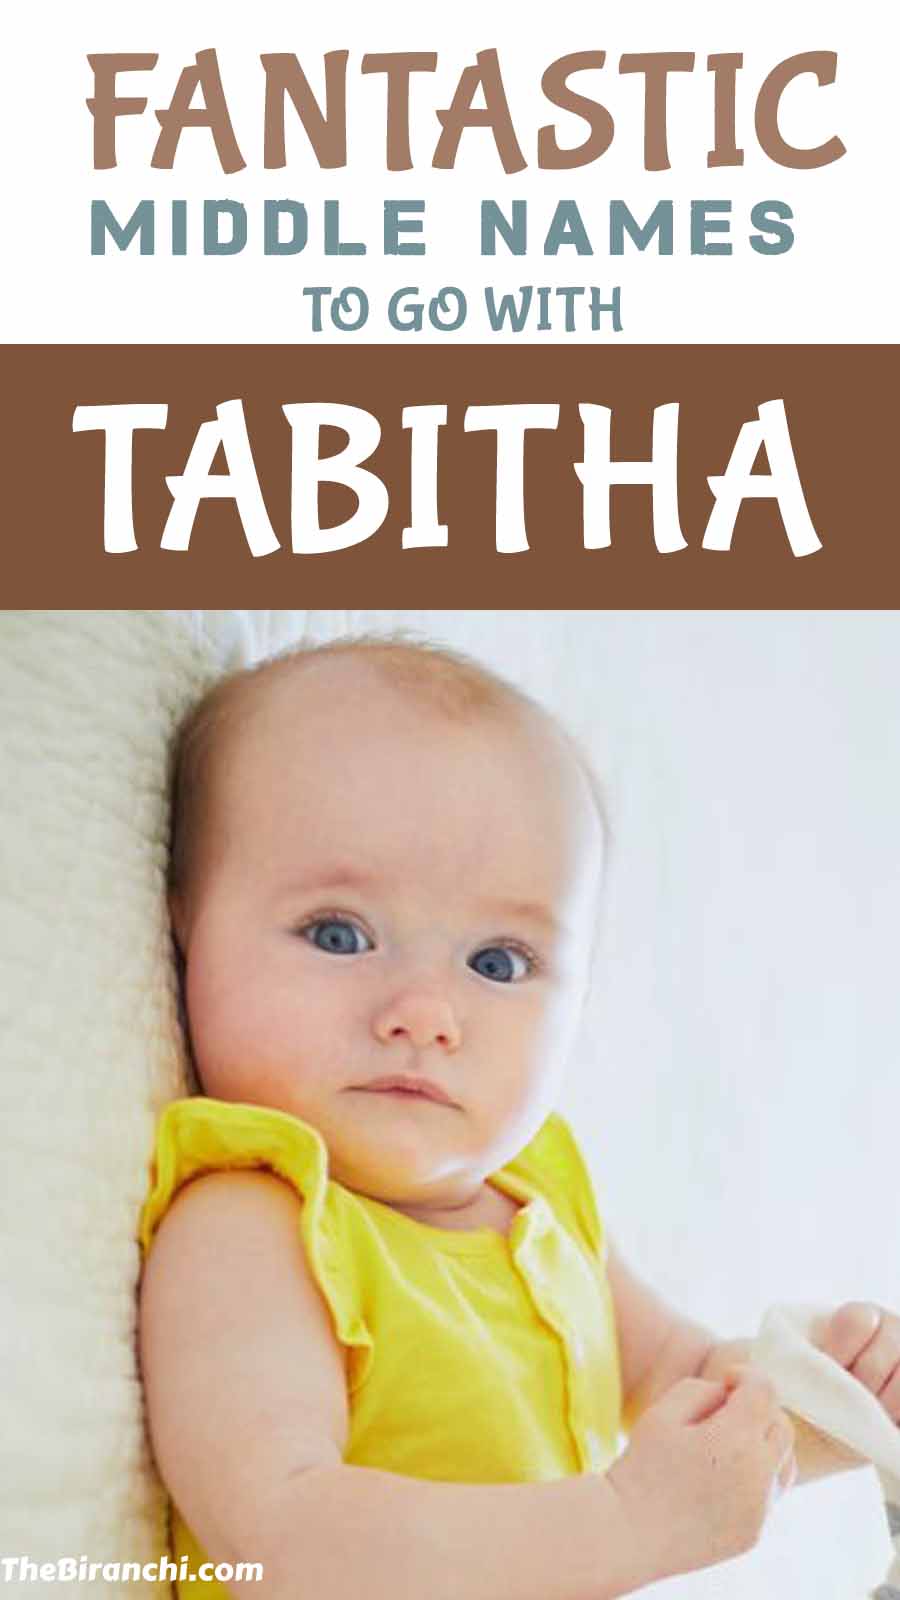 100 Perfect Middle Names For Tabitha [Catchy & Cool]